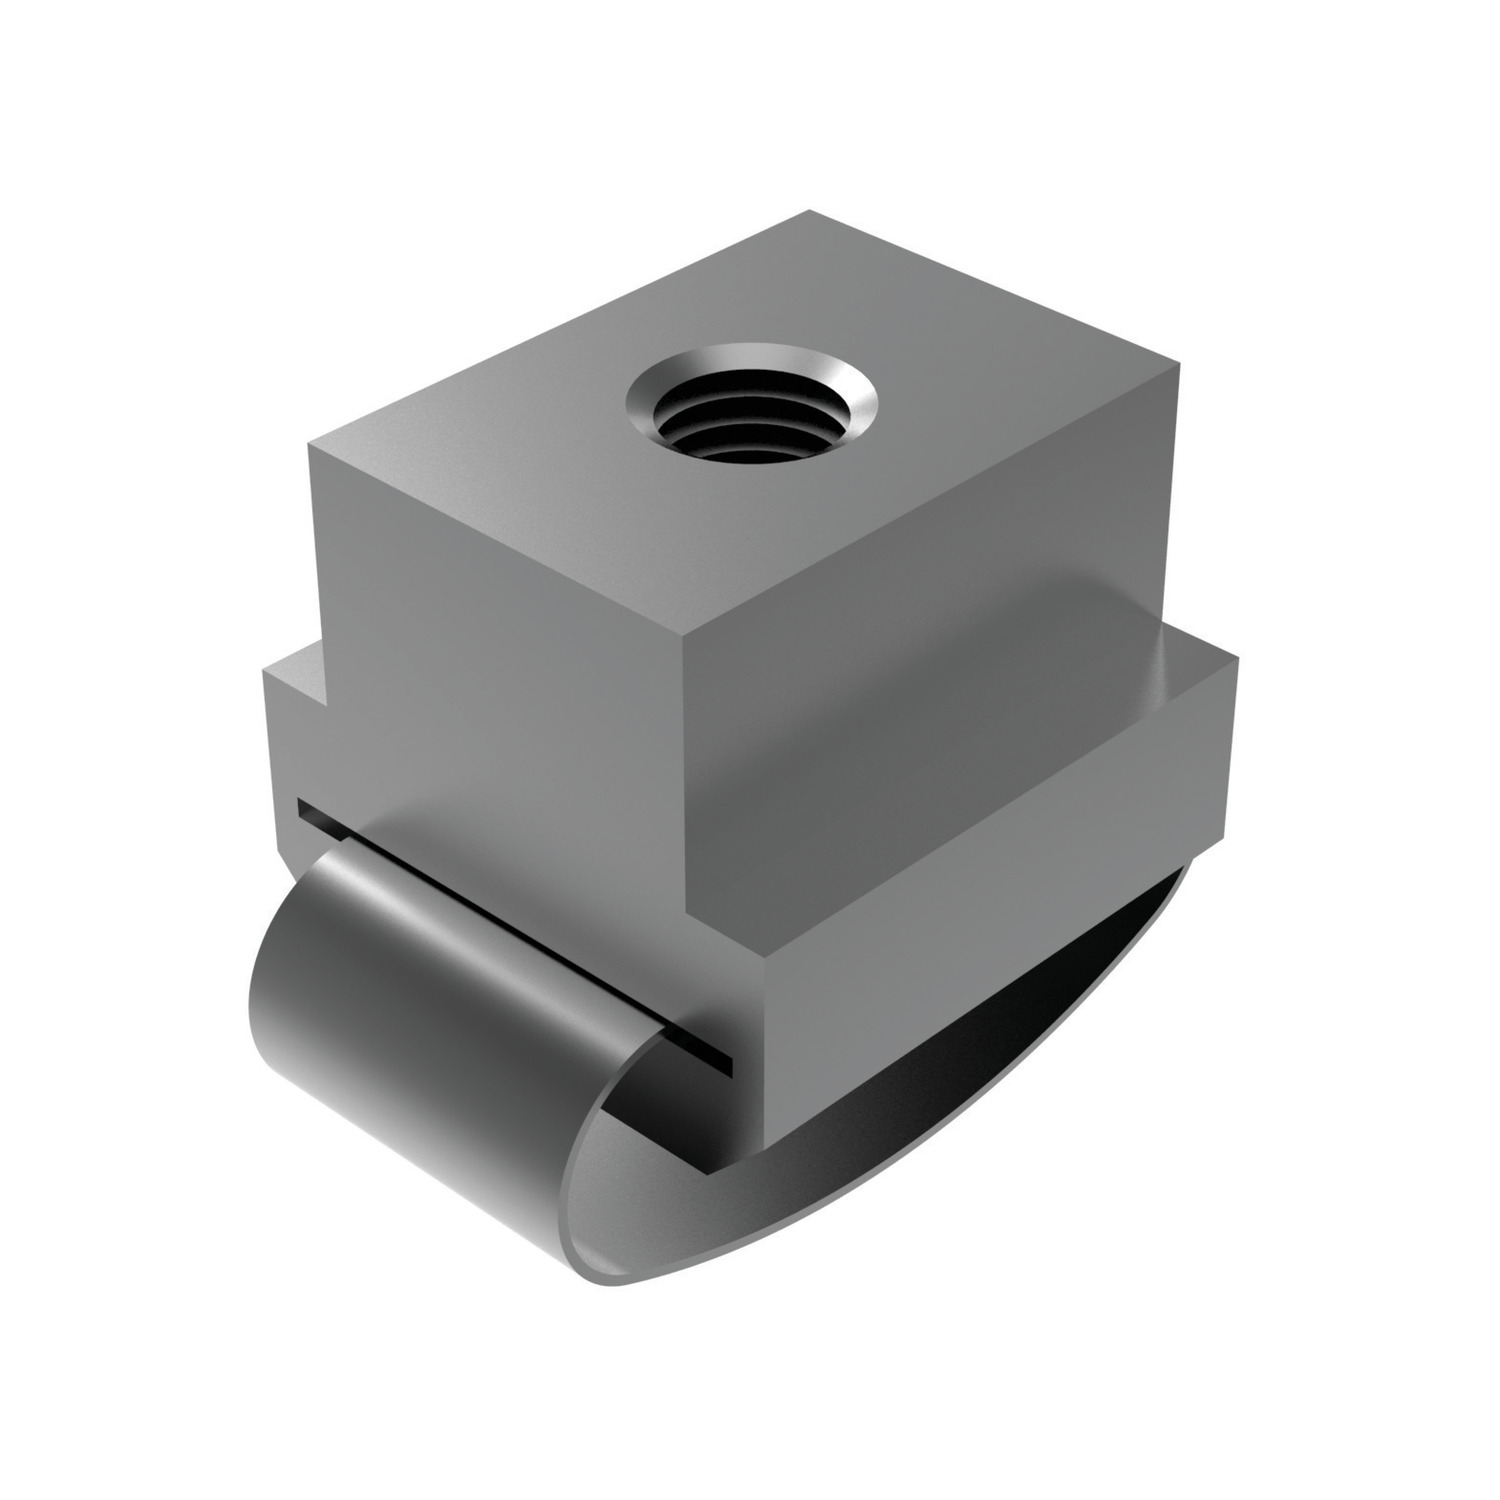 T-Nuts T-Nuts with anti-slip device. Available in heat-treated steel. The spring element prevents horizontal and vertical slipping of T-nut.